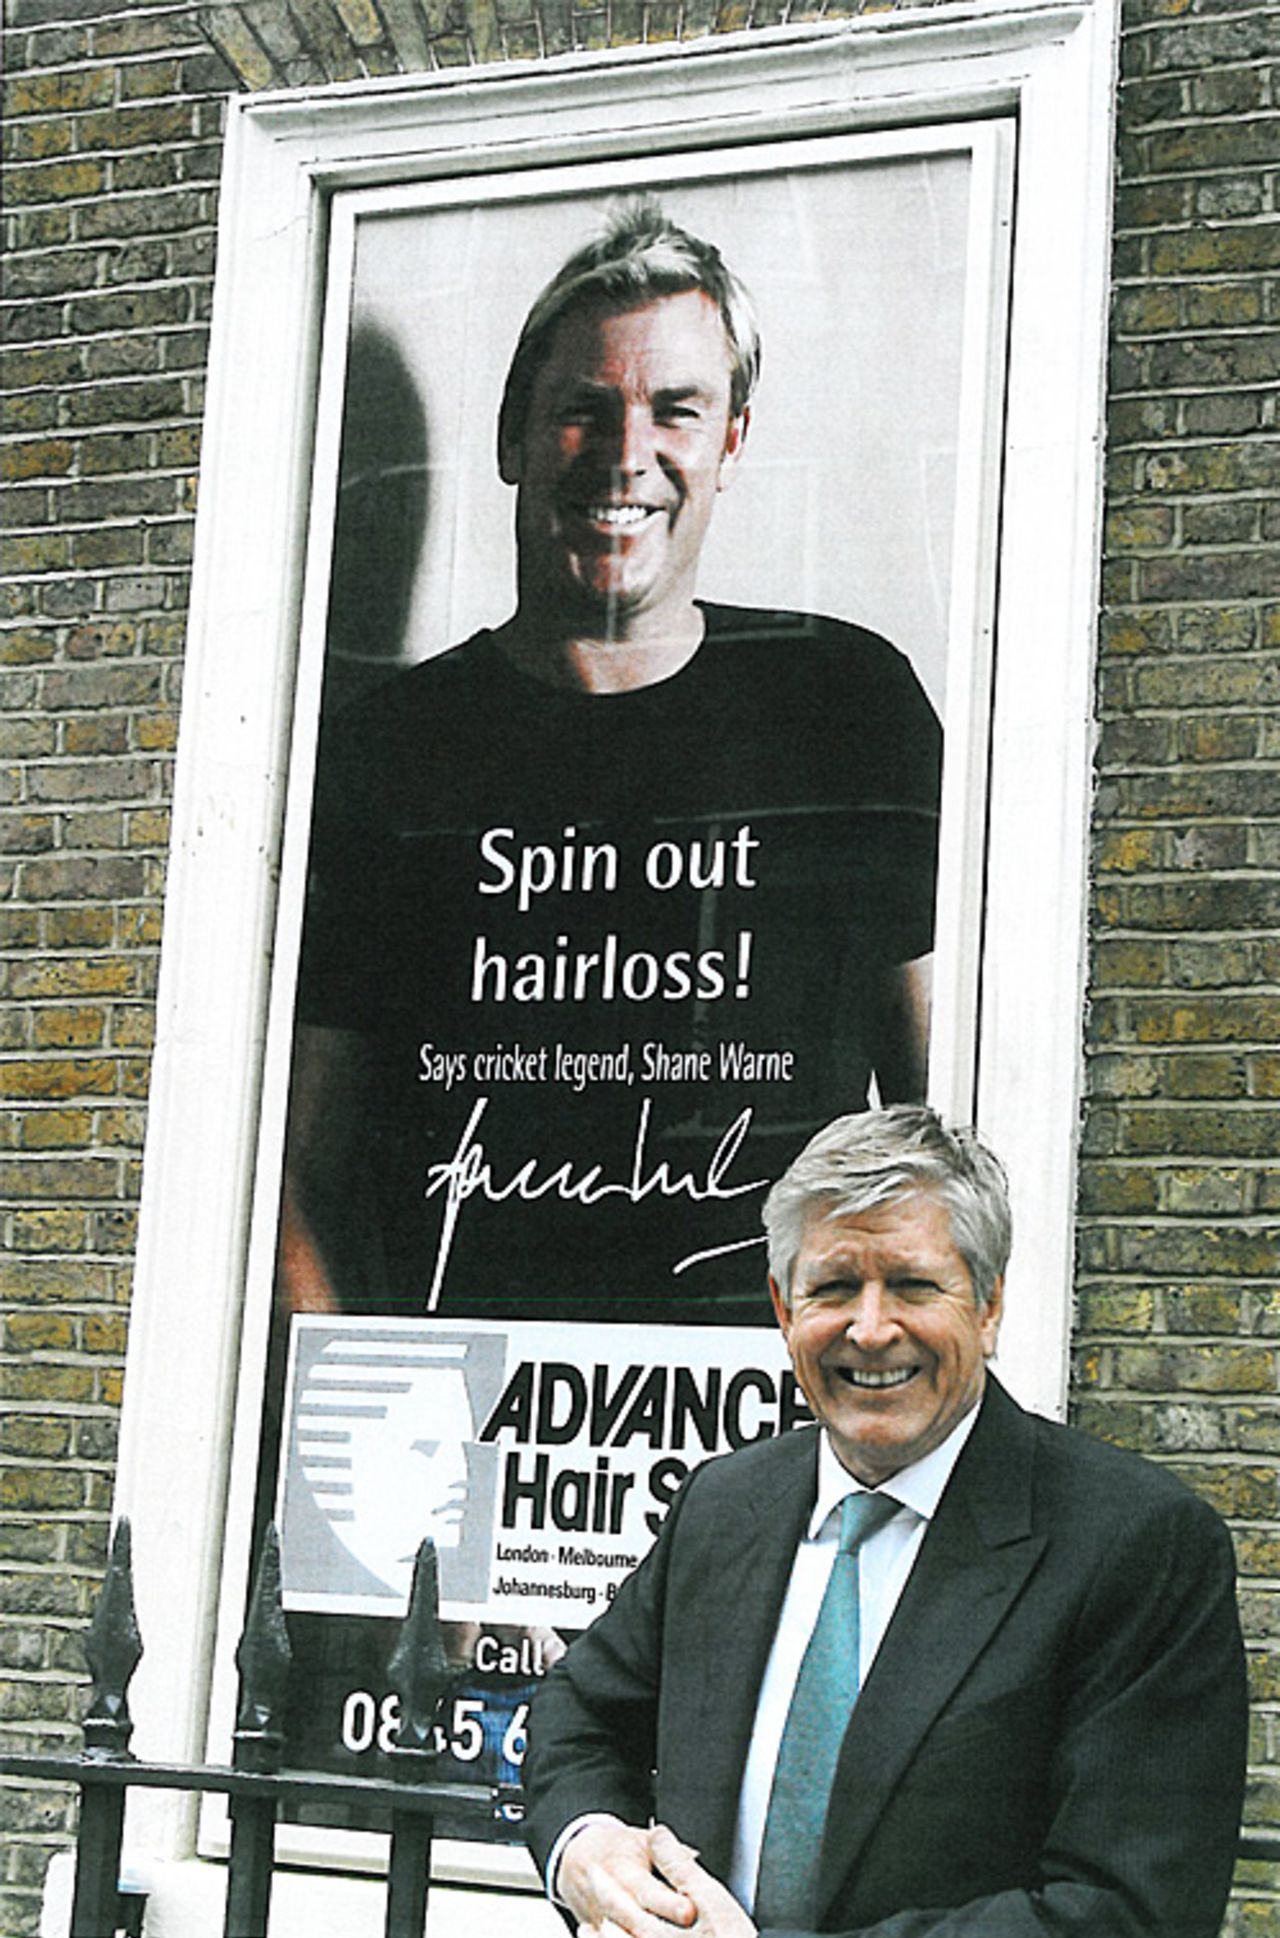 Carl Howell, chairman of Advanced Hair Studios, in front of a poster of Shane Warne, Camden, London, June 29, 2009